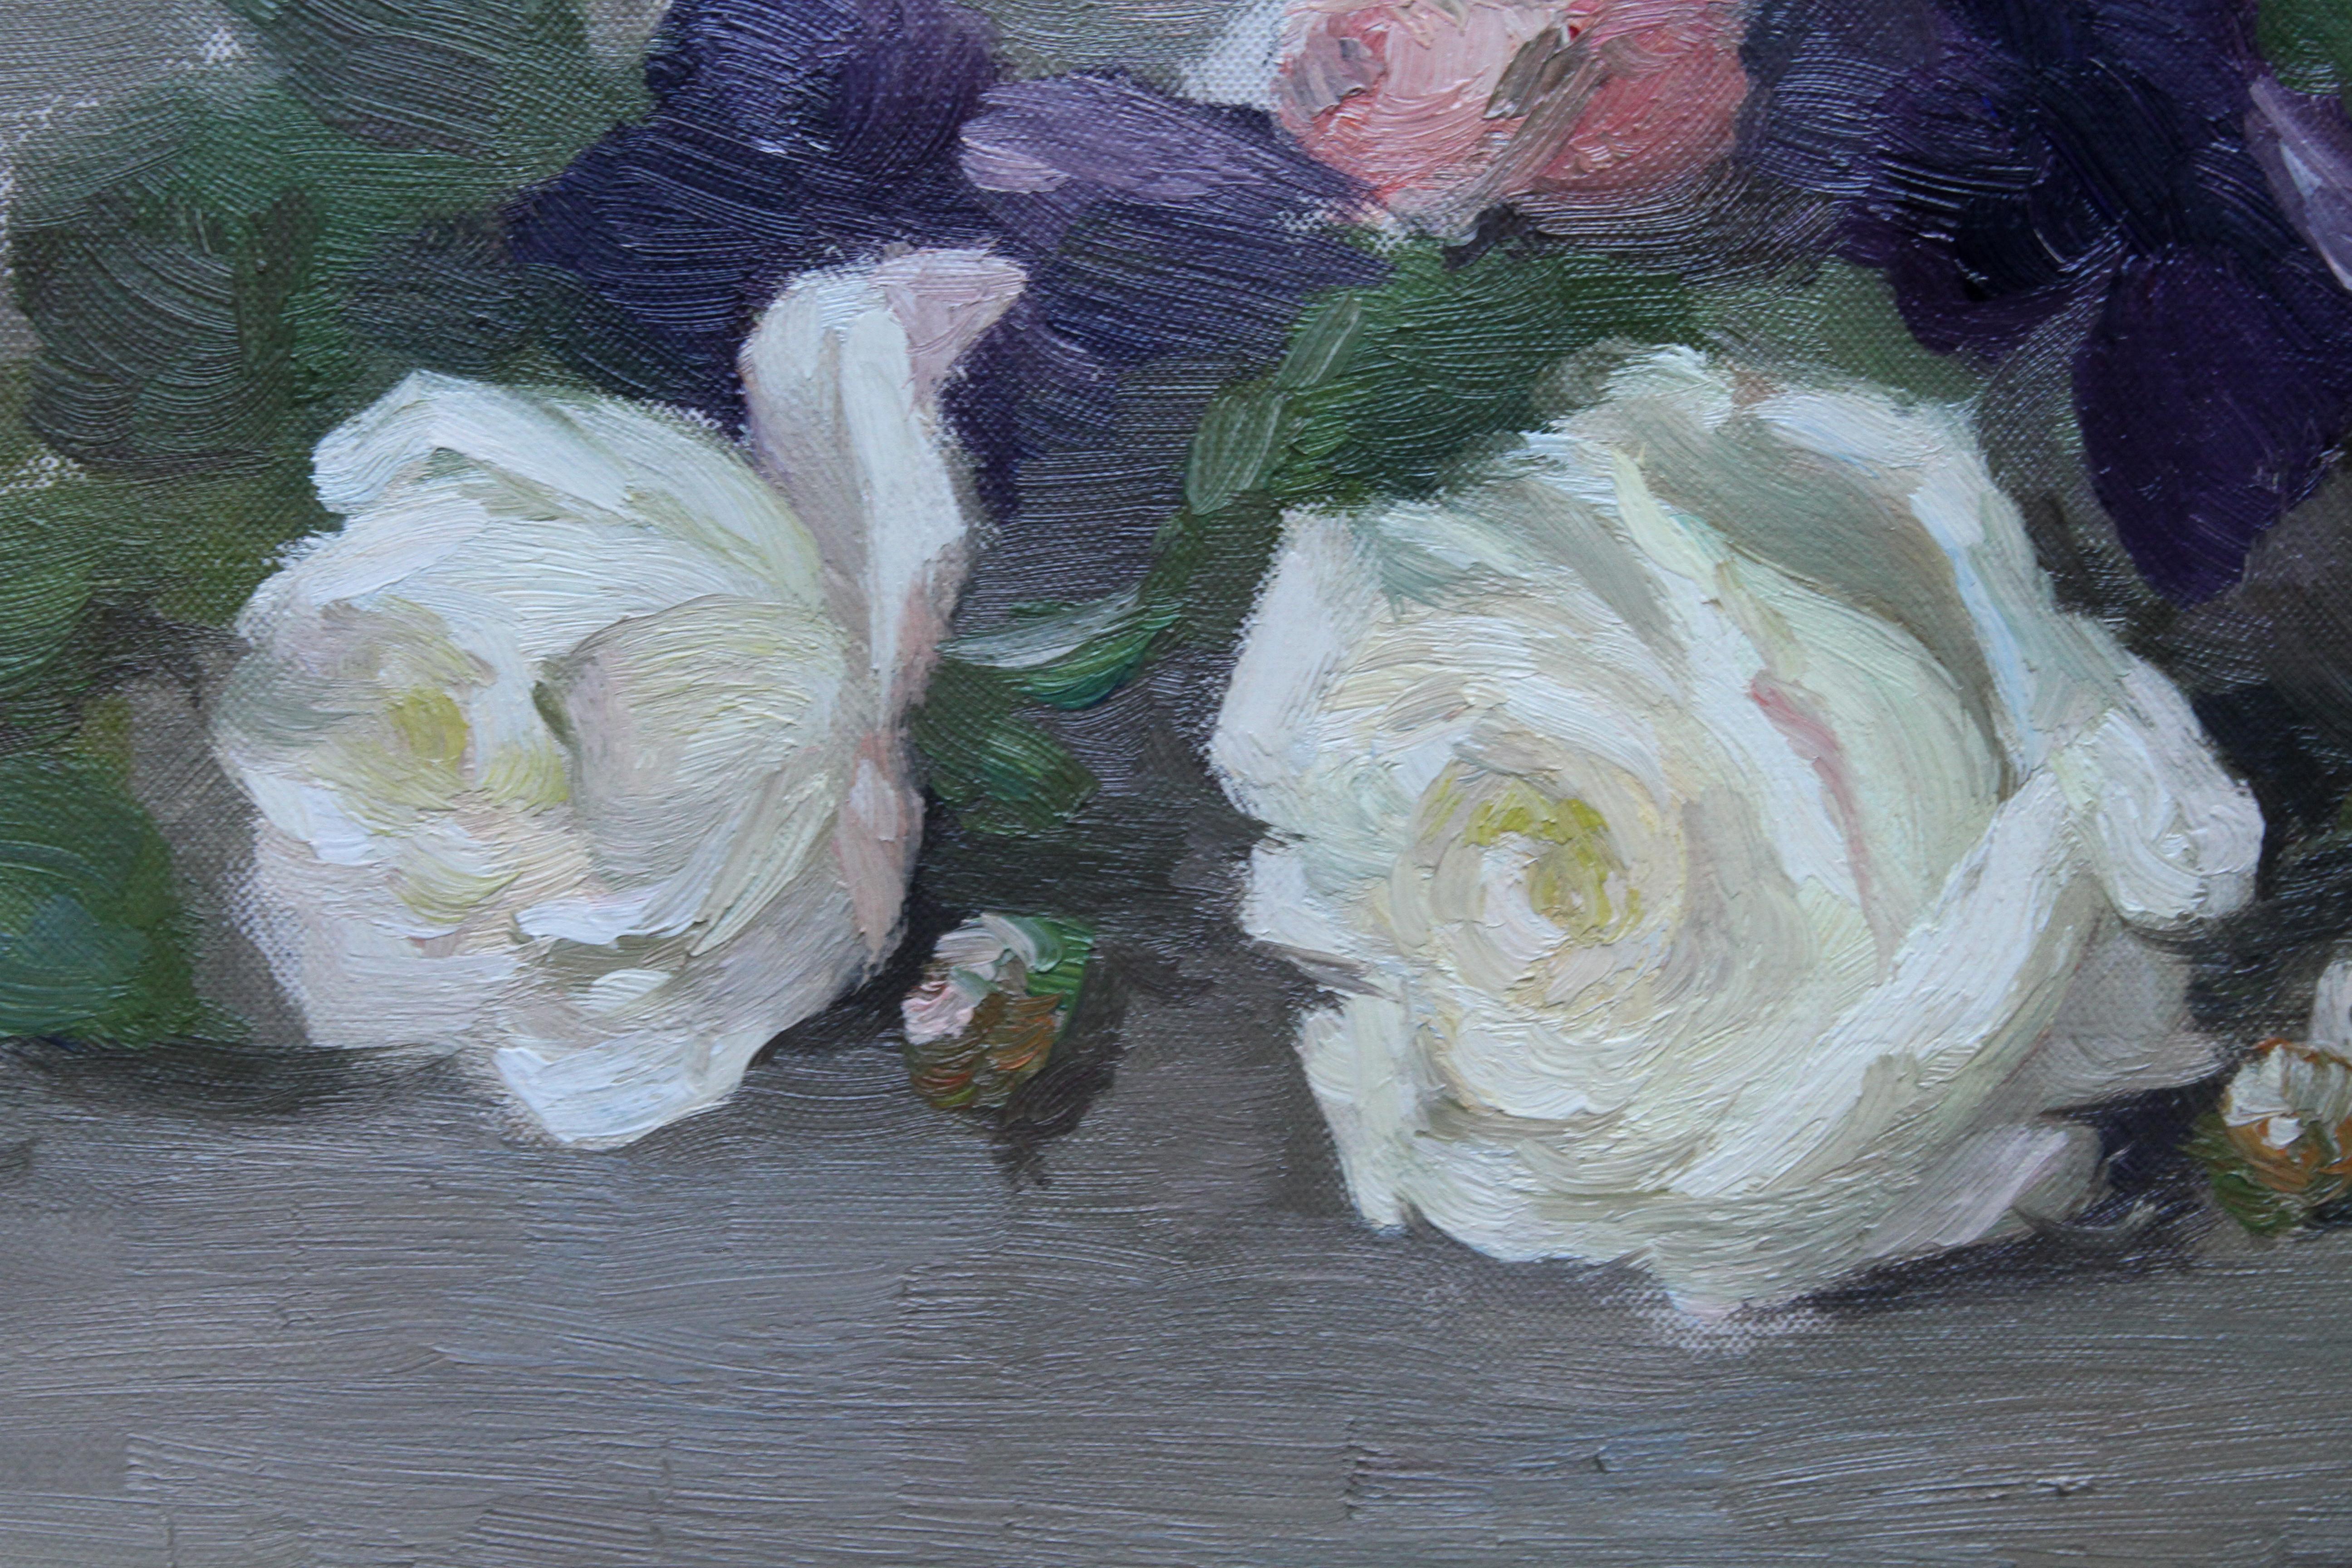 Roses and Violets - Scottish Edwardian art floral oil painting exhib 1908 RSA For Sale 2